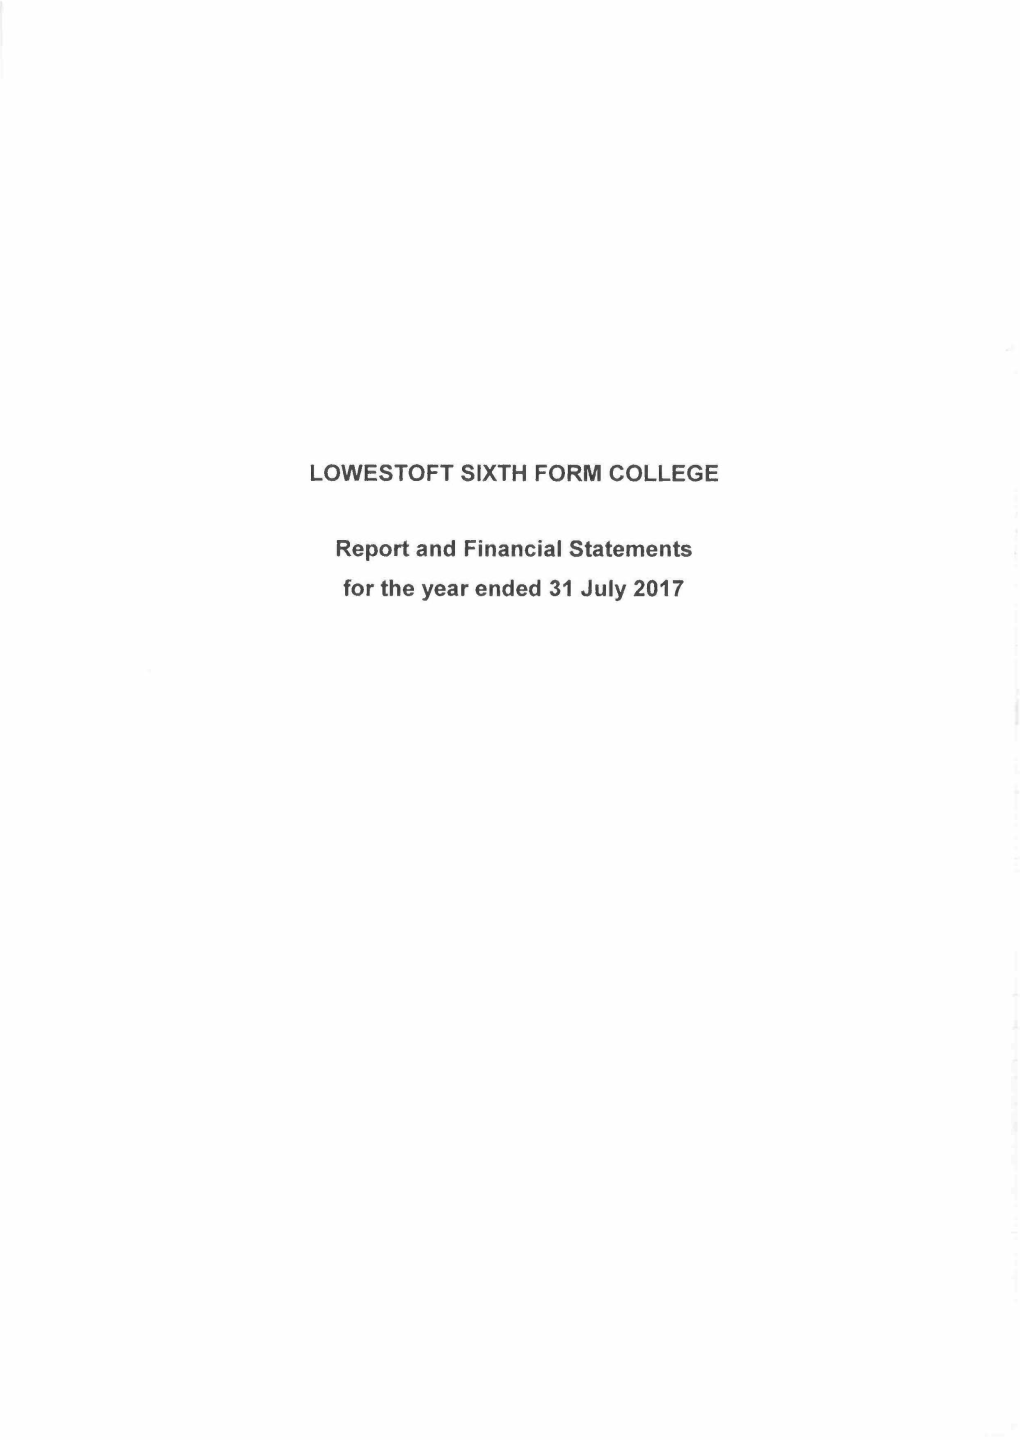 LOWESTOFT SIXTH FORM COLLEGE Report and Financial Statements for the Year Ended 31 July 2017